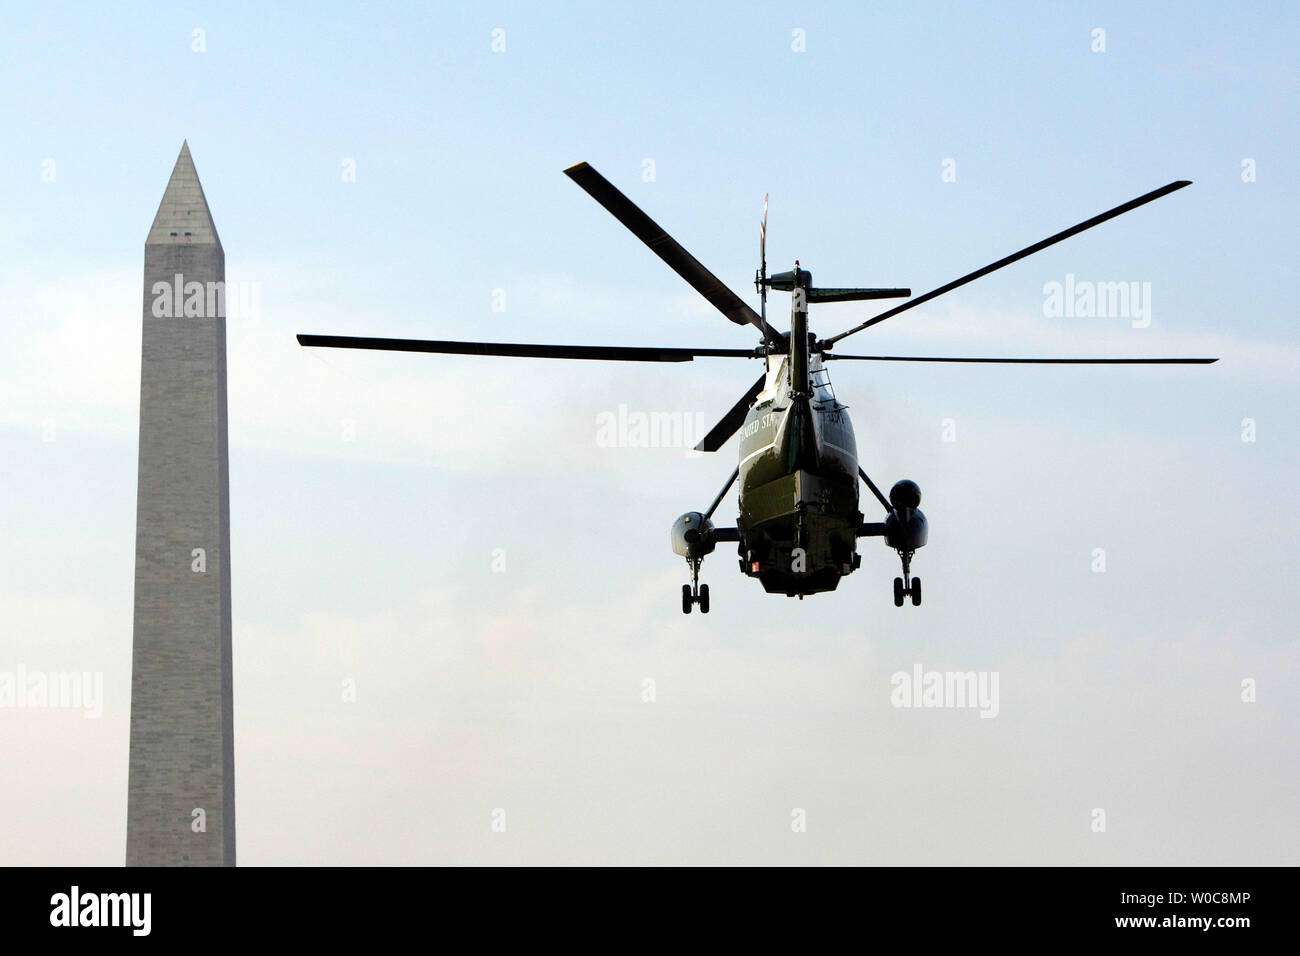 Marine One, carrying U.S. President George W. Bush, flies by the Washington Monument in Washington on August 15, 2008. President Bush is traveling to his ranch in Crawford, Texas. (UPI Photo/Patrick D. McDermott) Stock Photo